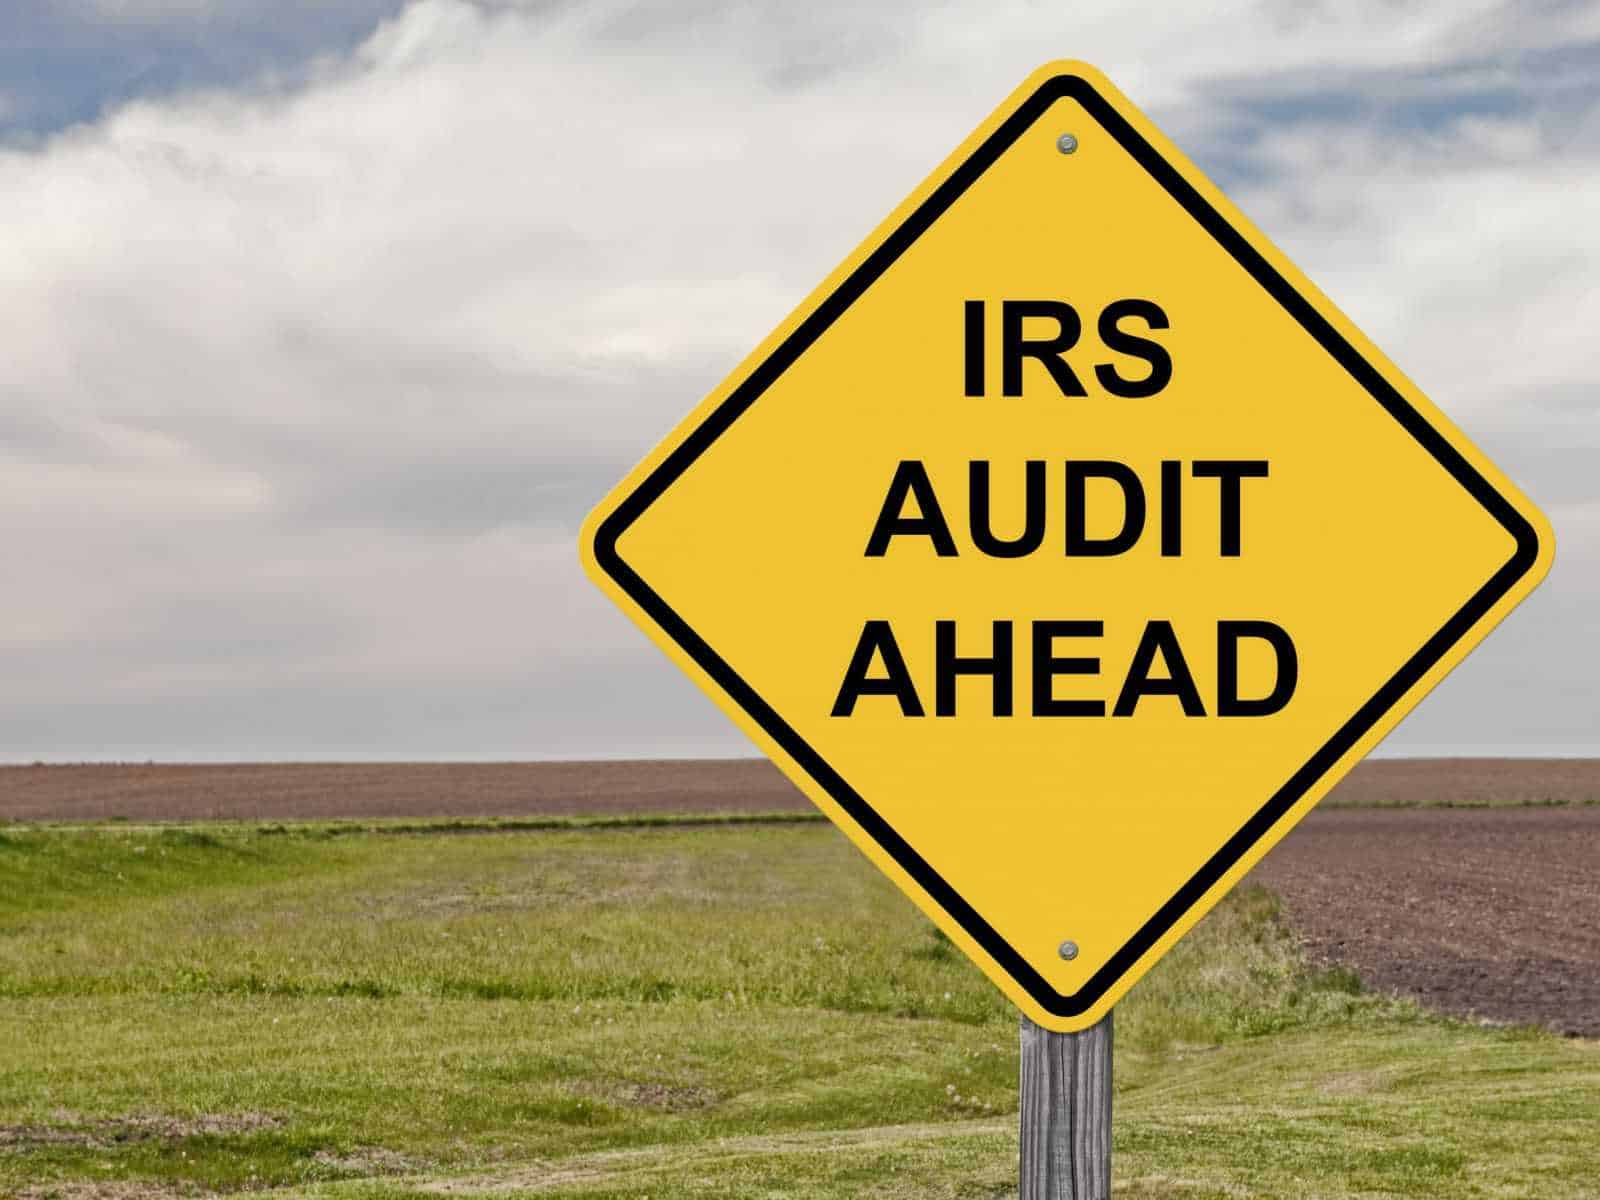 How Long Does an IRS Tax Audit Take?